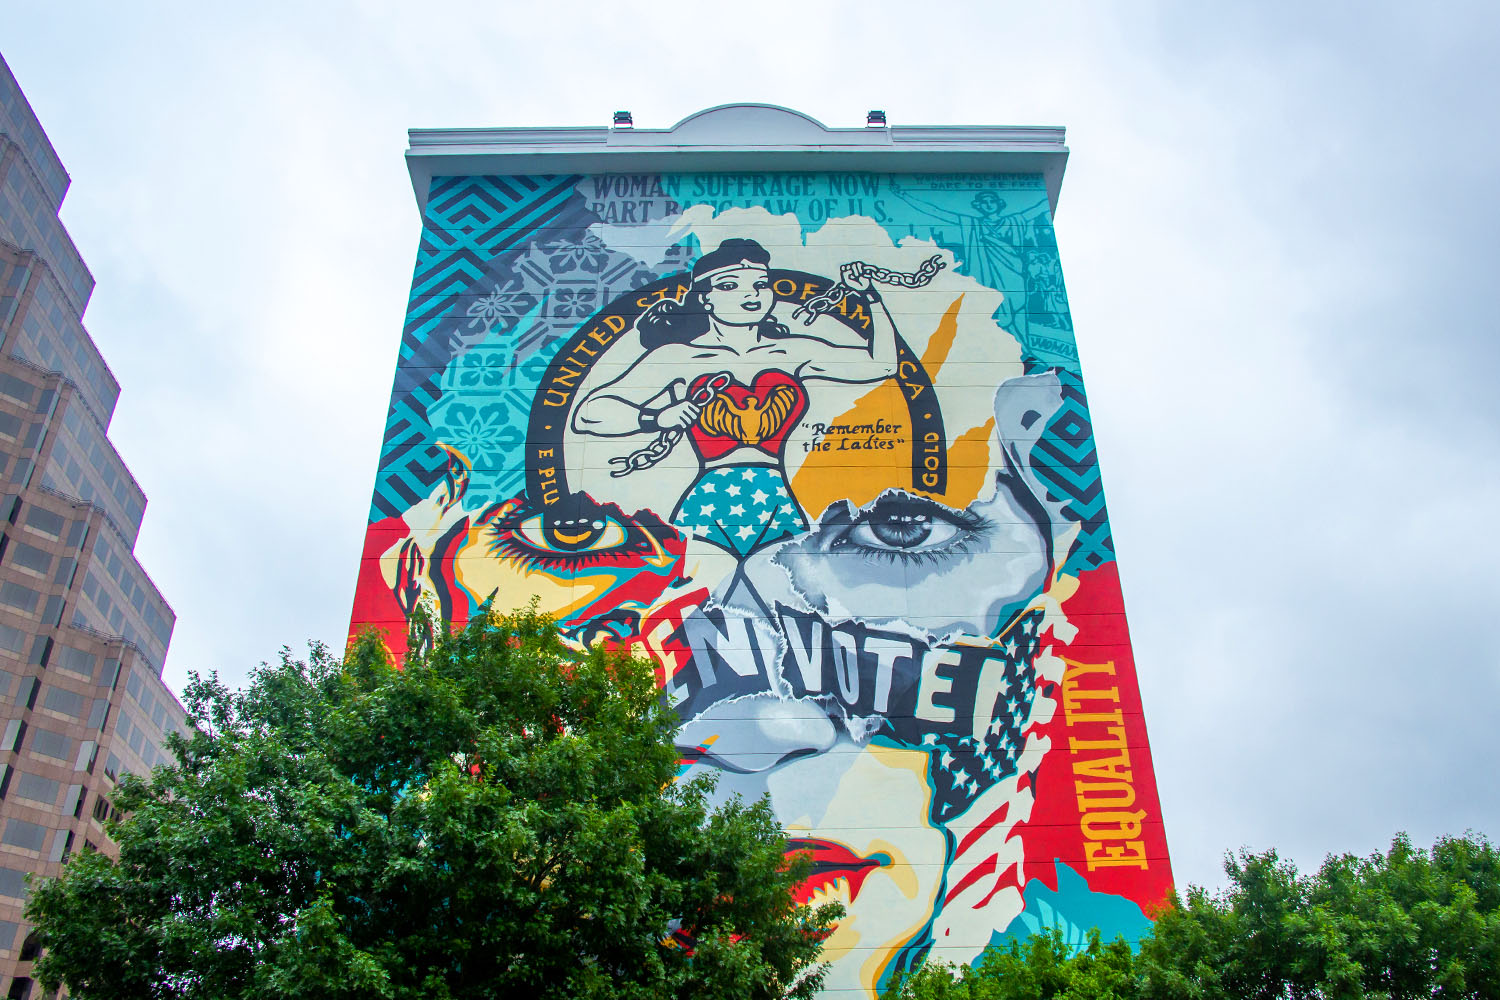 Shepard Fairey's mural "The Beauty of Liberty and Equality" in Austin, Texas